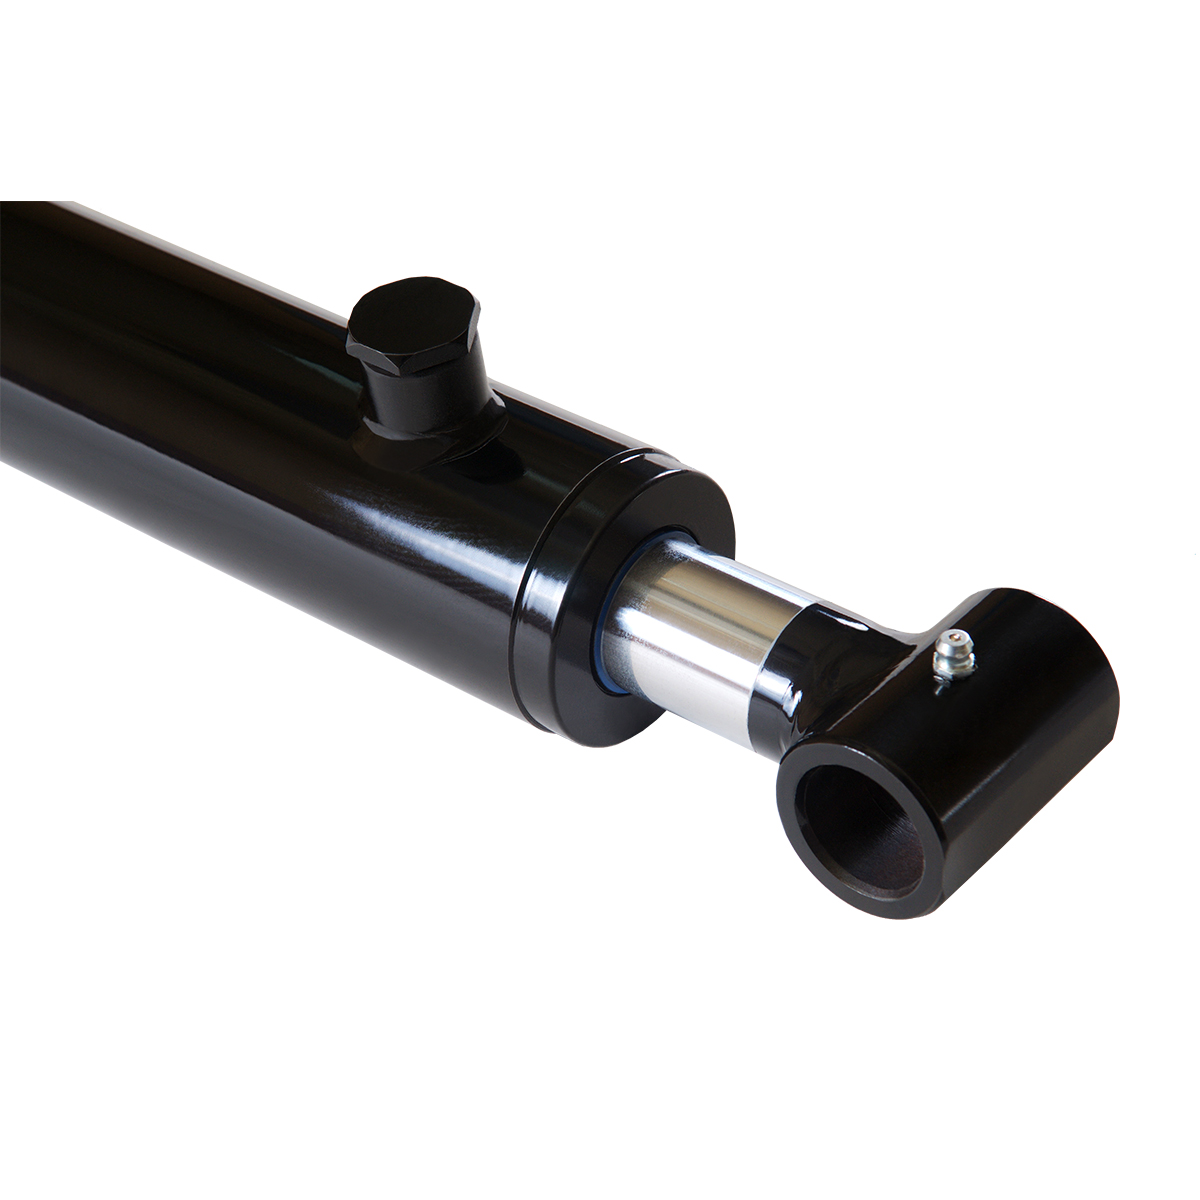 2 bore x 36 stroke hydraulic cylinder, welded cross tube double acting cylinder | Magister Hydraulics